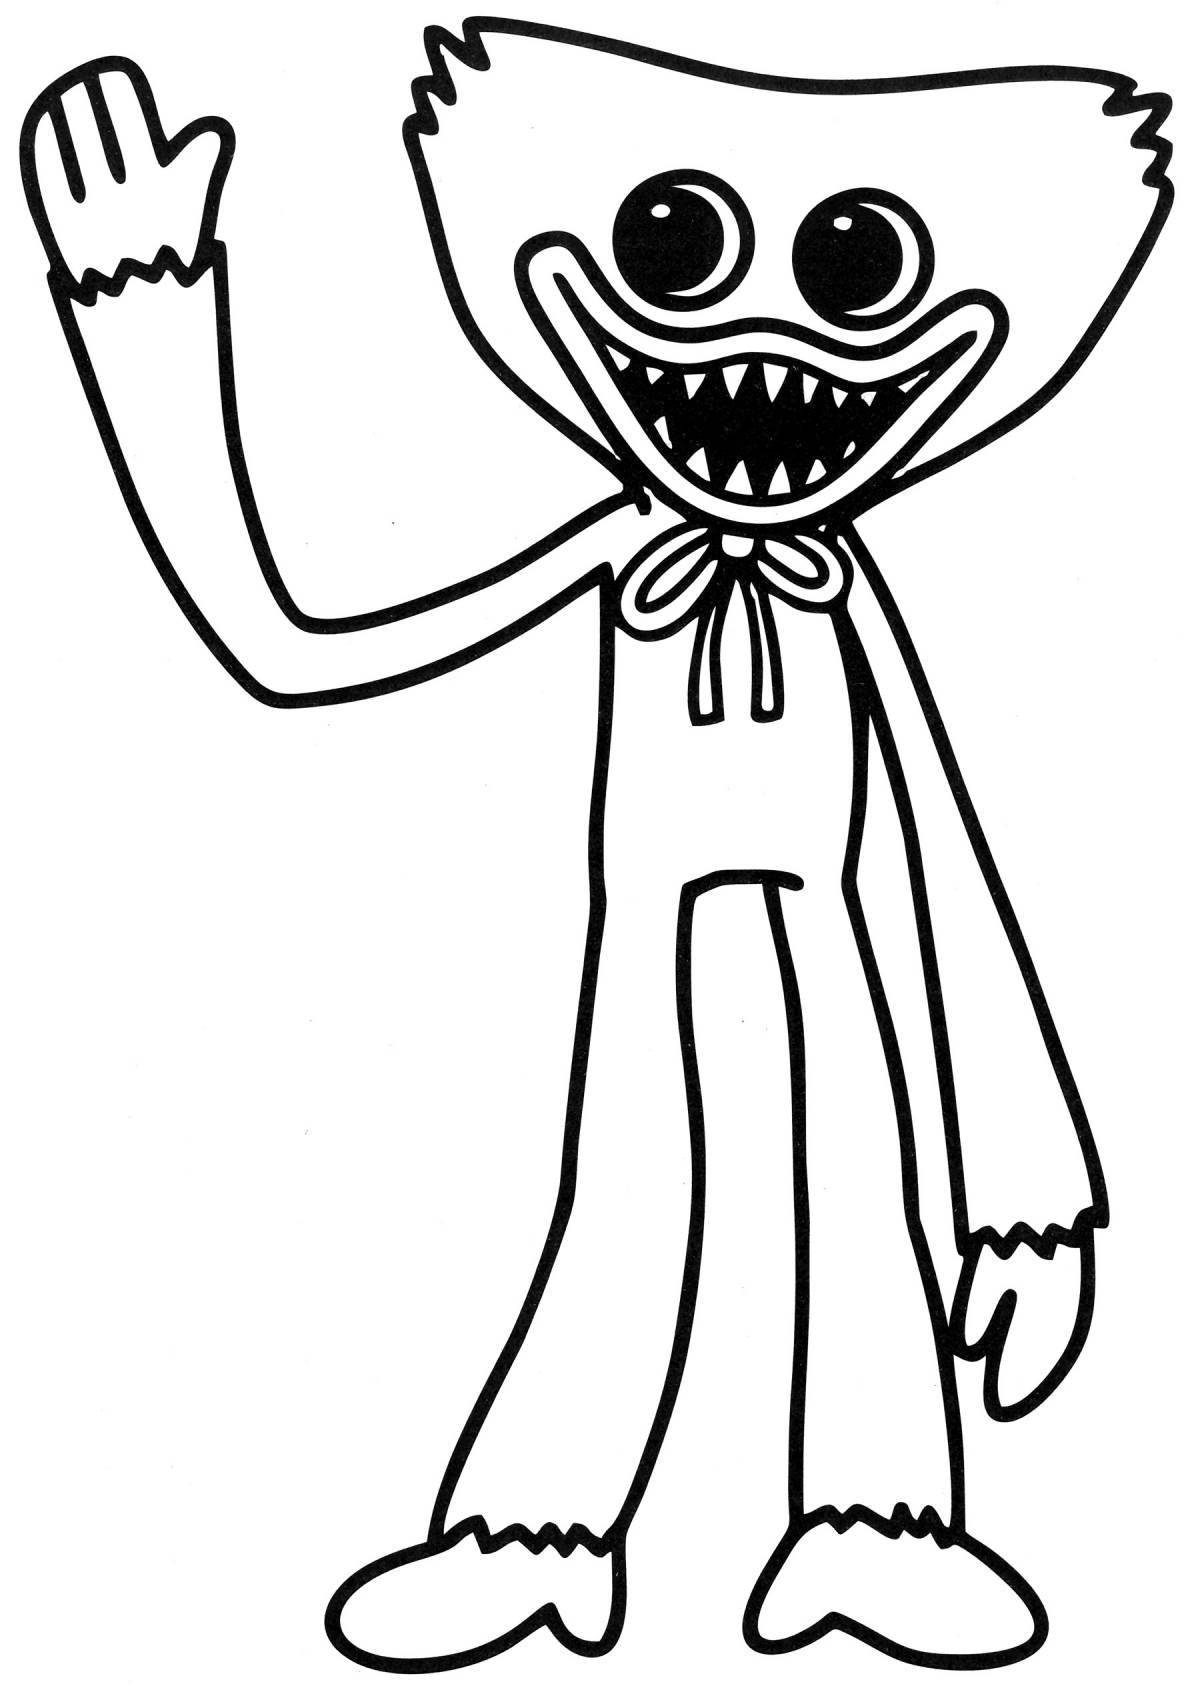 Blue monster coloring page